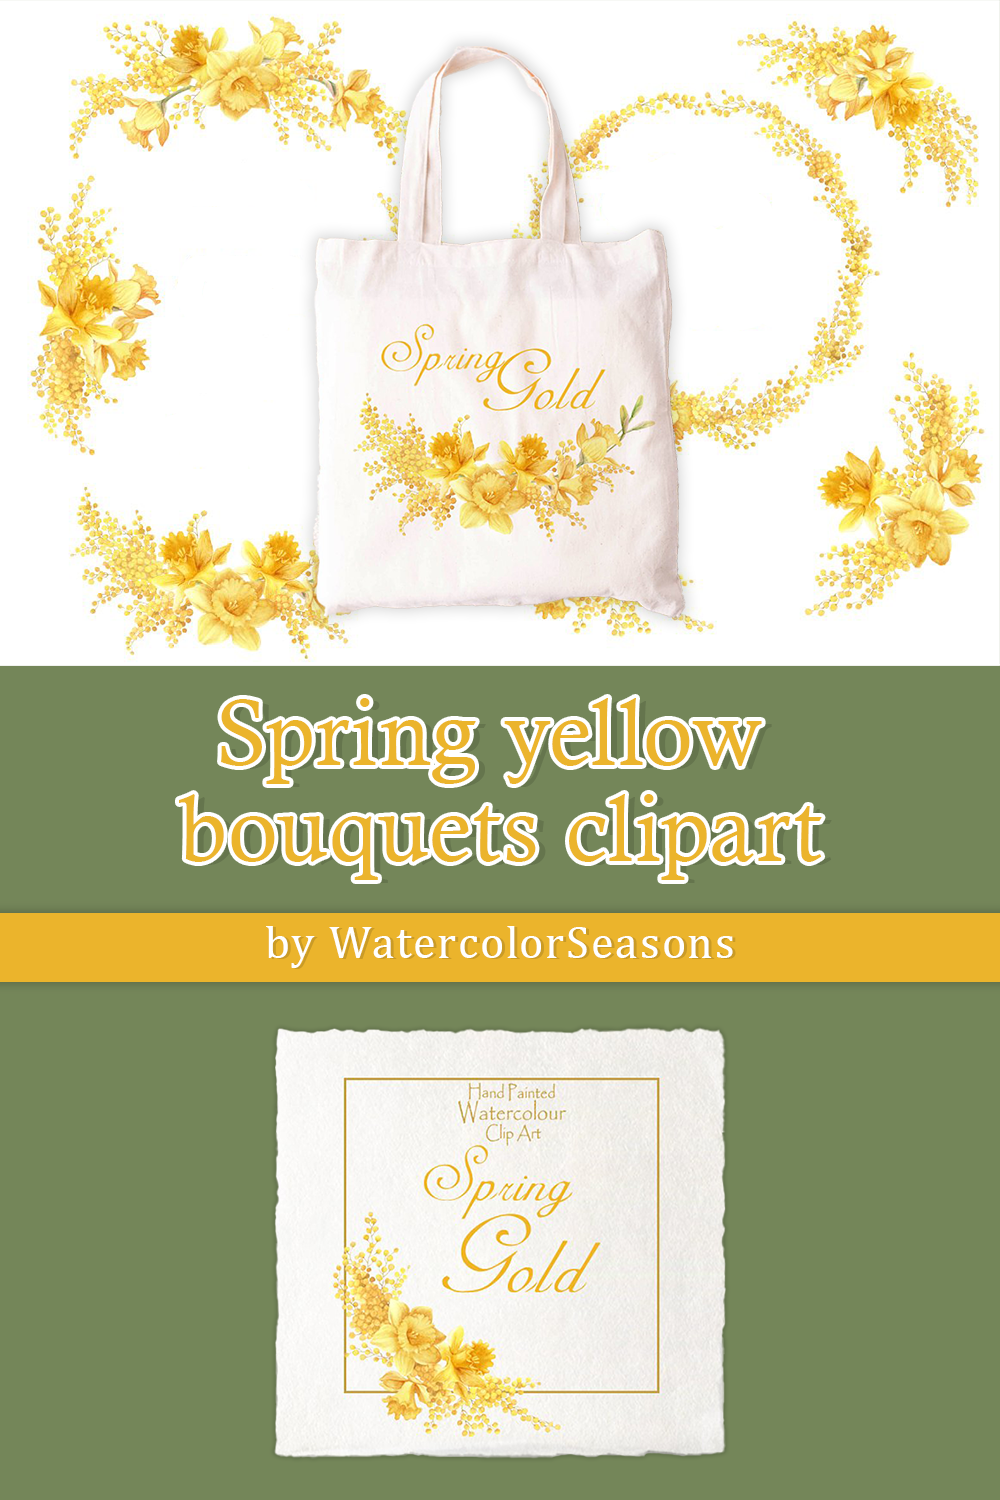 Spring yellow bouquets clipart of pinterest.